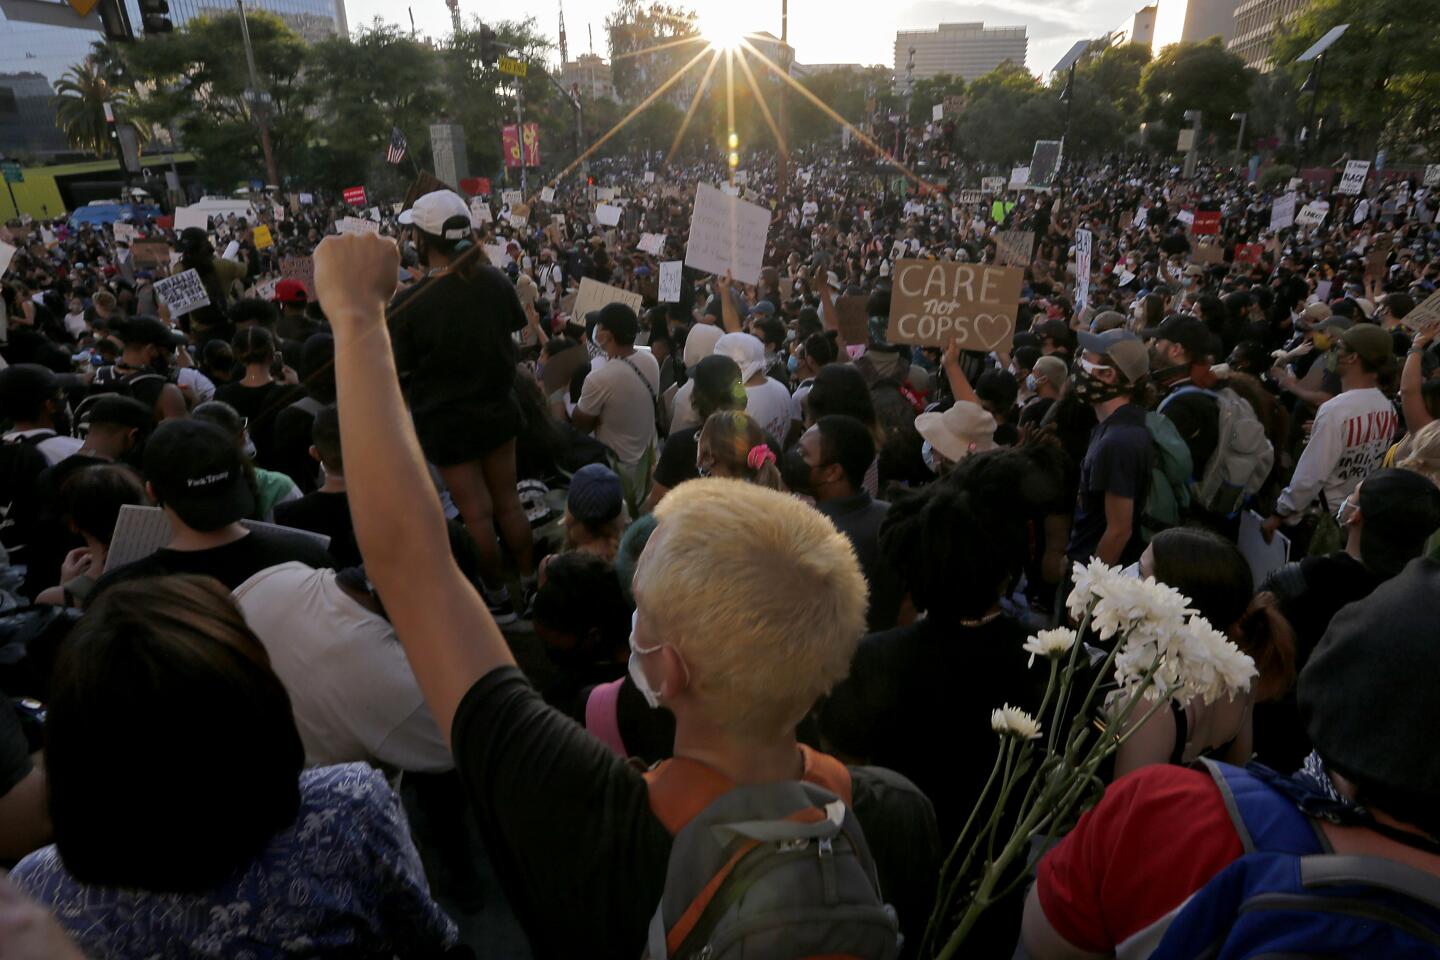 Protesters gather at the Los Angeles Civic Center to demonstrate in solidarity